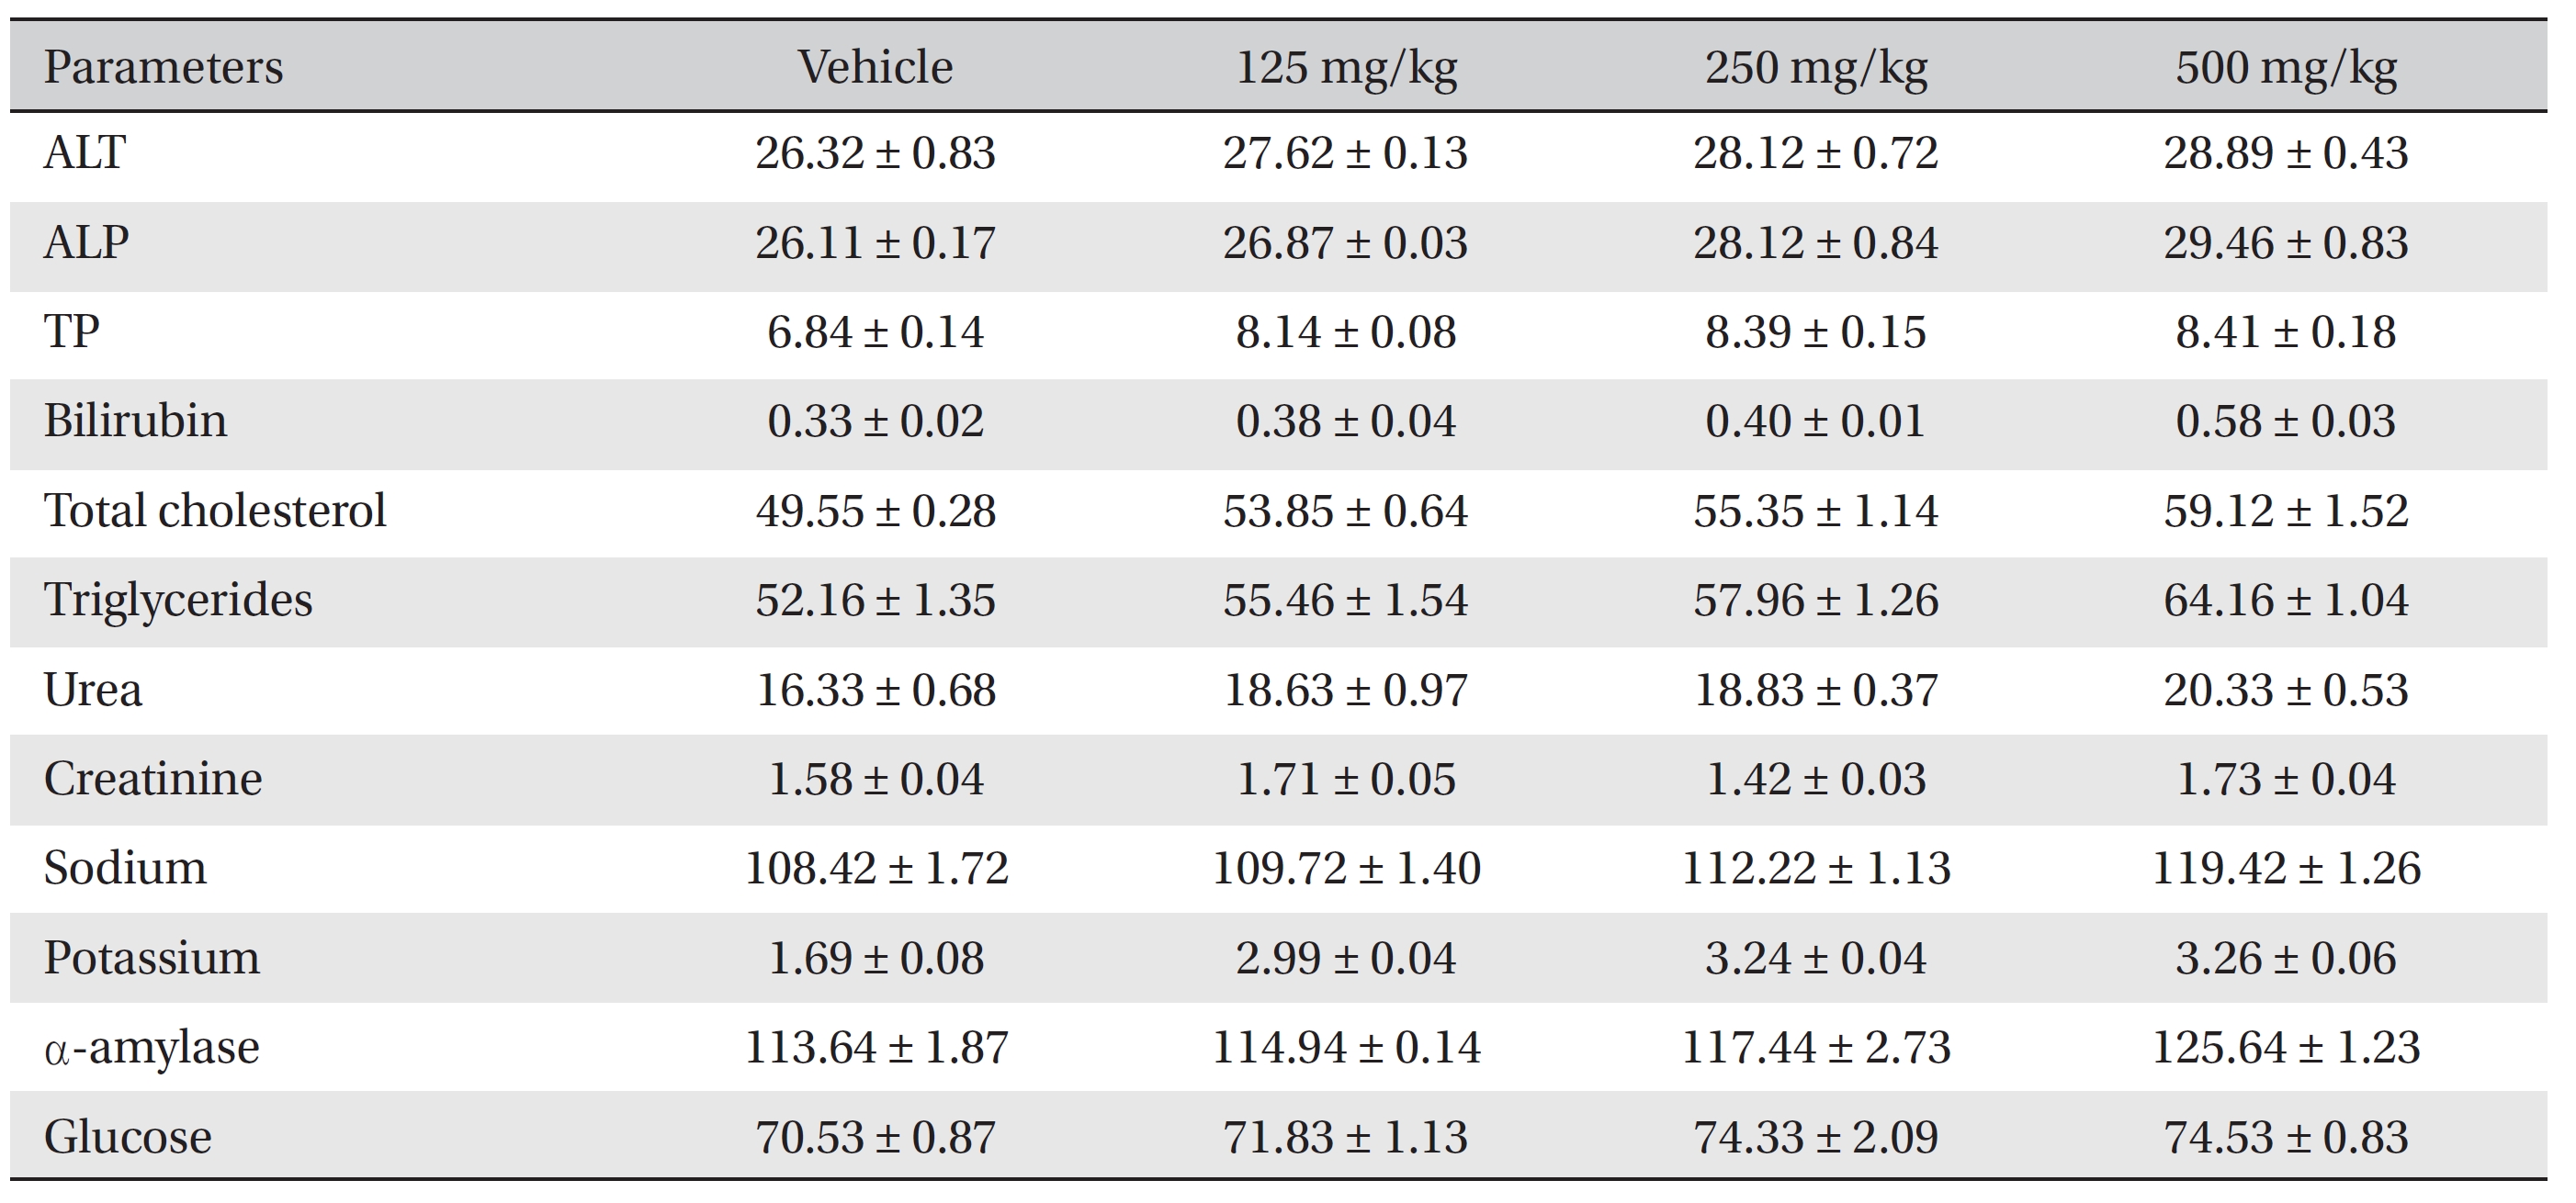 Serum biochemical values for rats in the sub-acute toxicity study for the control group and the groups treated with different
doses of the test extract of W. volubilis